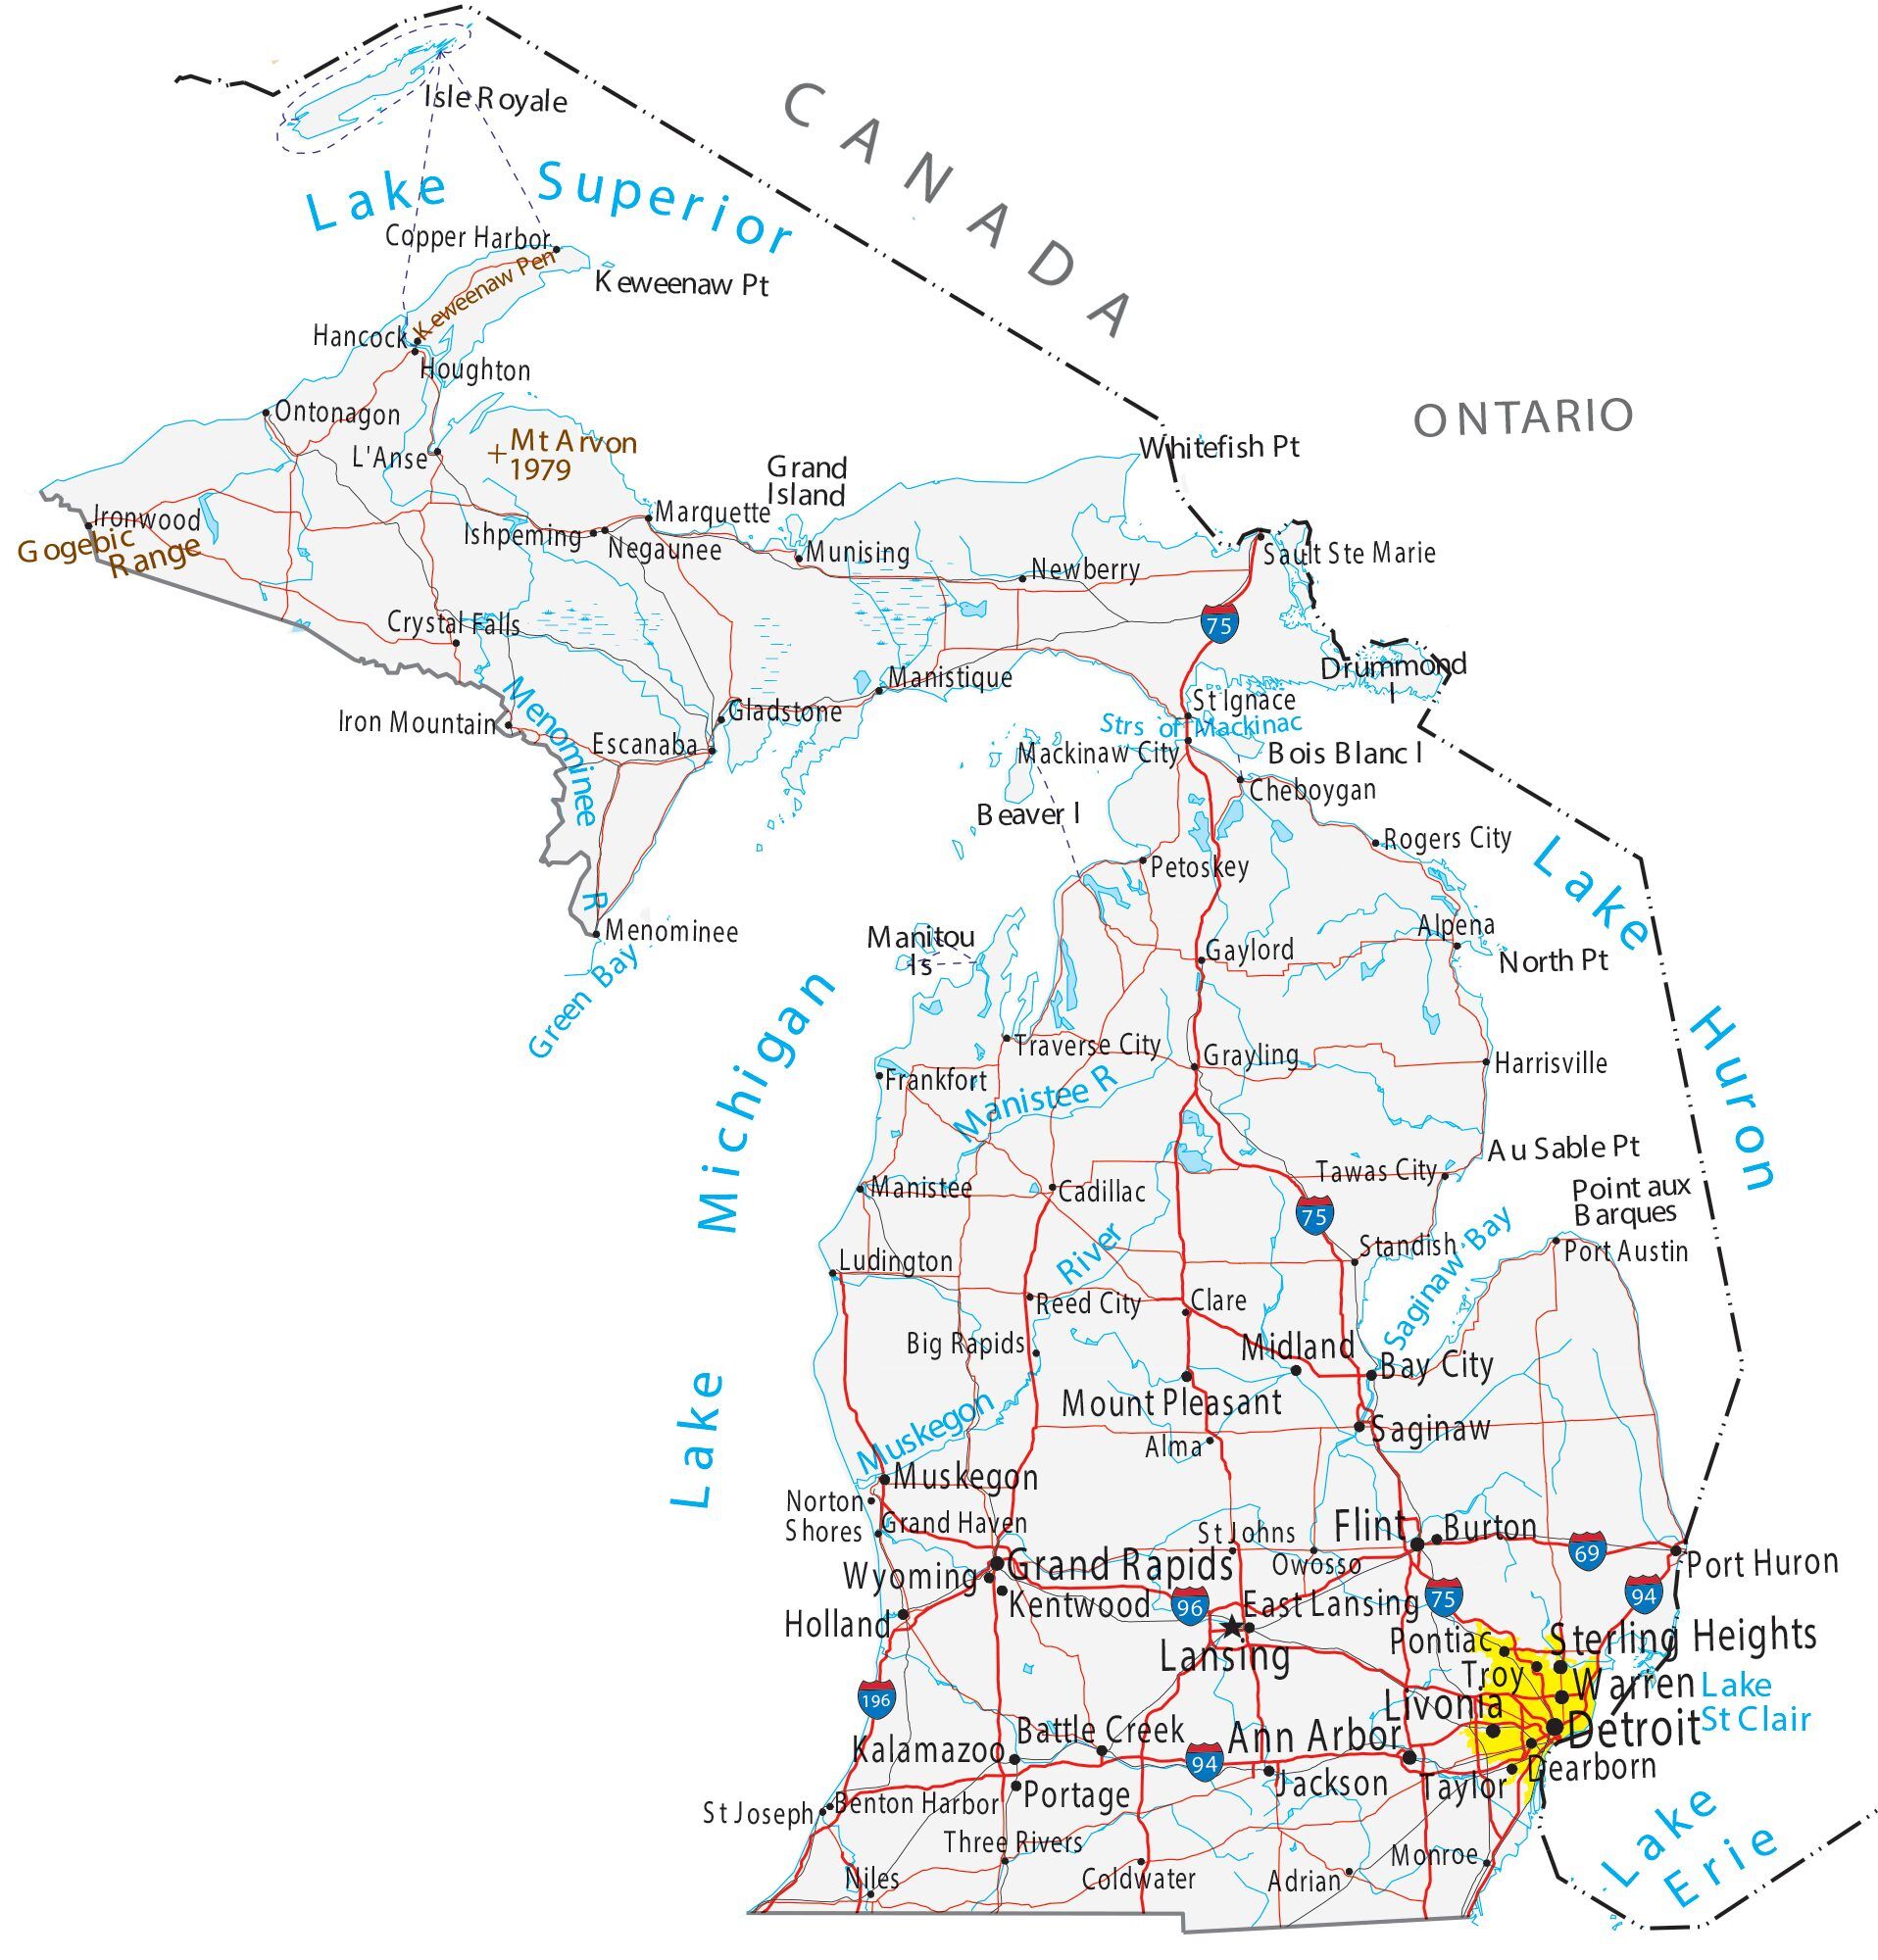 Map of Michigan - Cities and Roads - GIS Geography